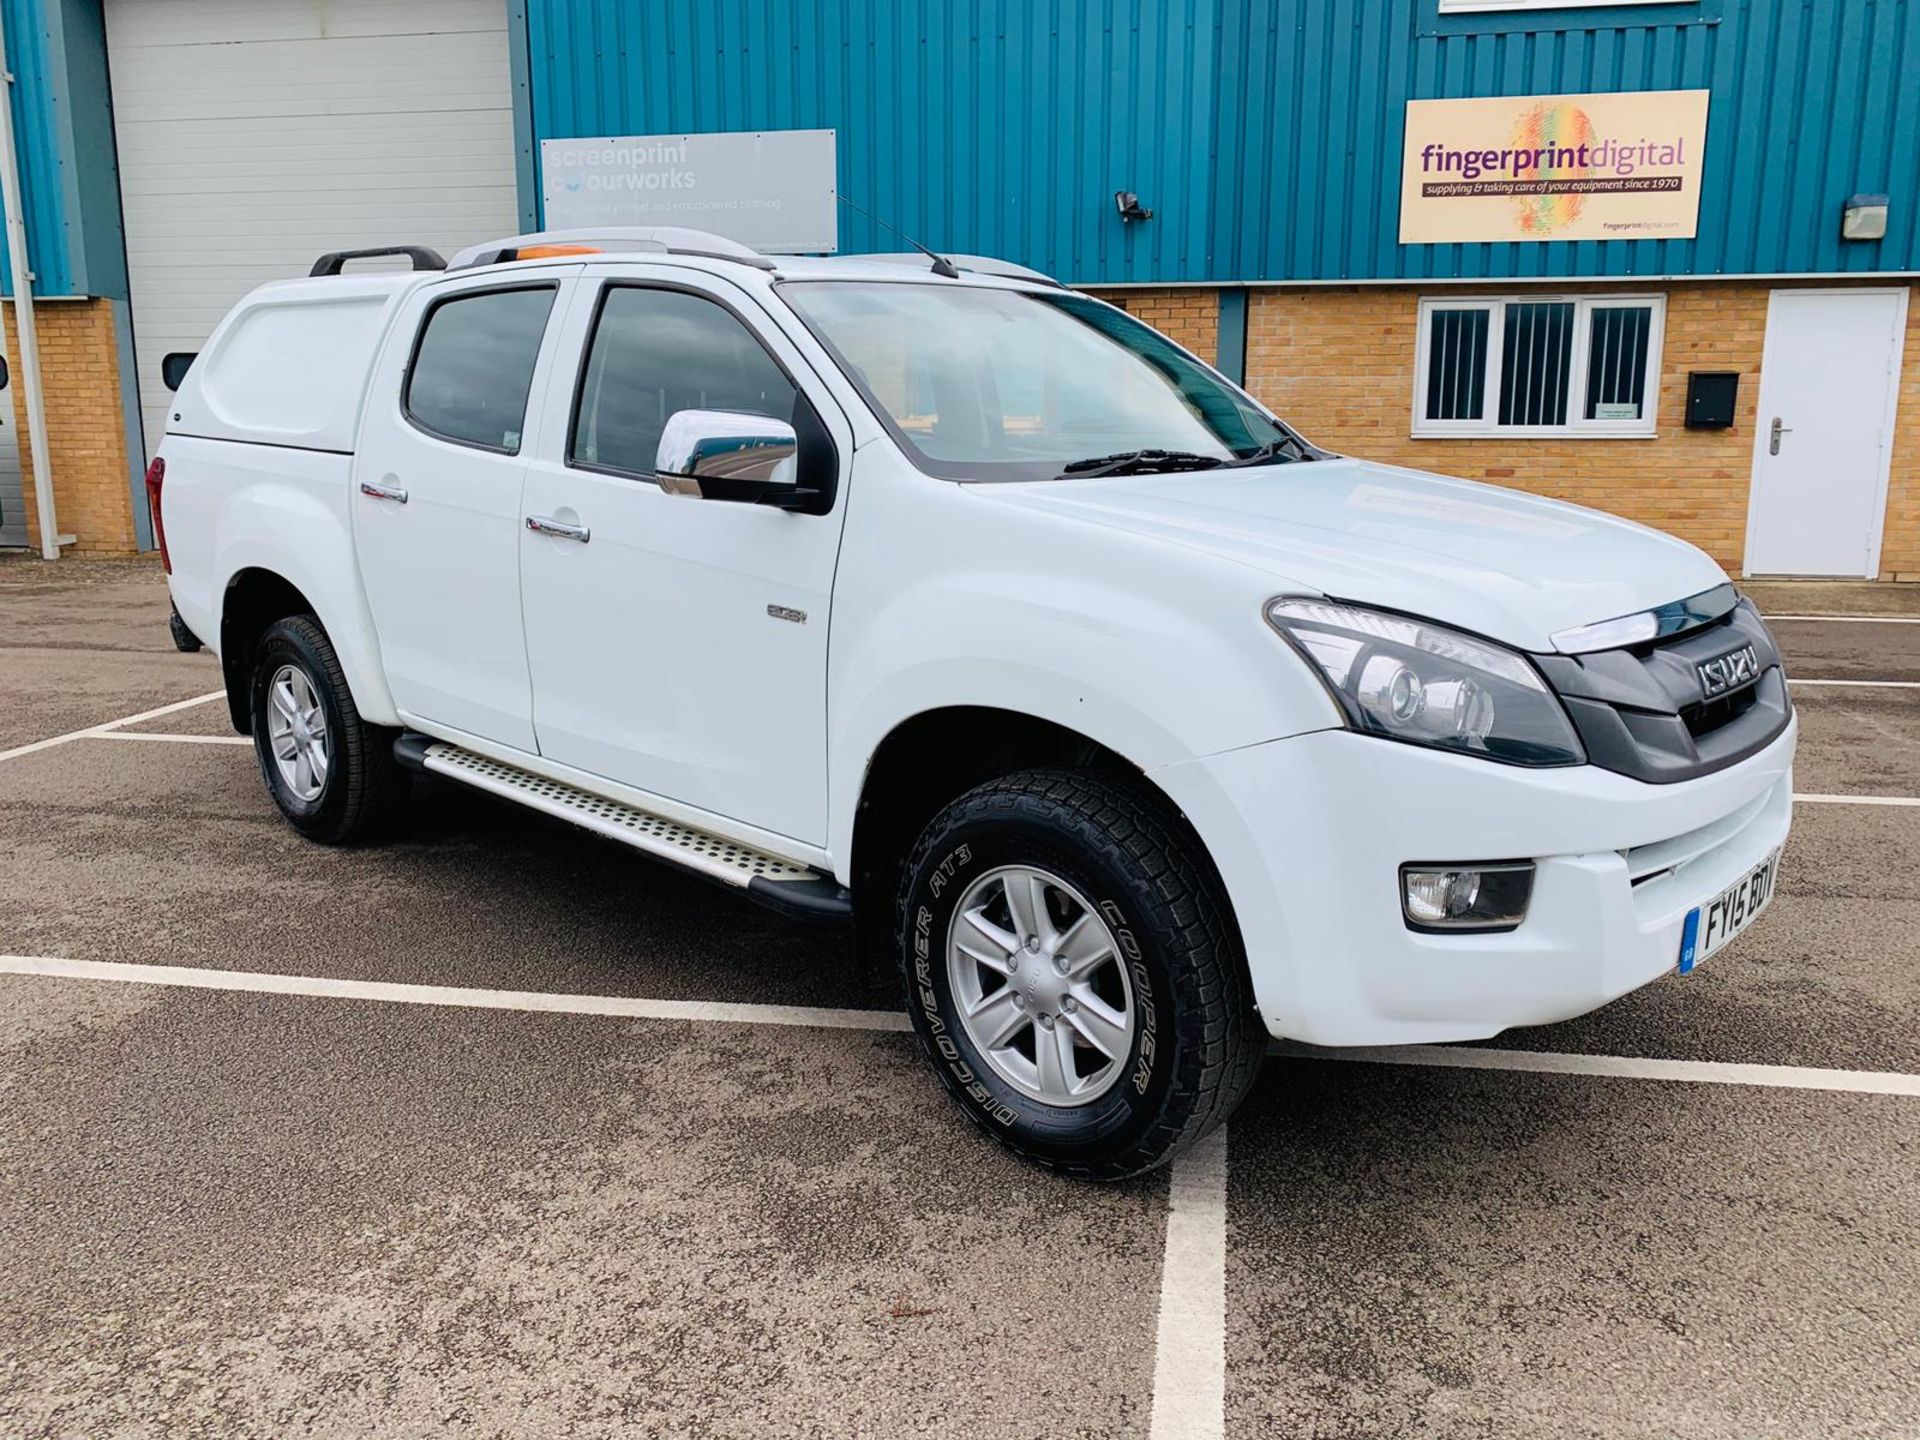 Isuzu D-Max Eiger 2.5 TD Double Cab Pick Up - 2015 15 Reg - Air Con - Tow Pack - 4X4 - Image 3 of 24